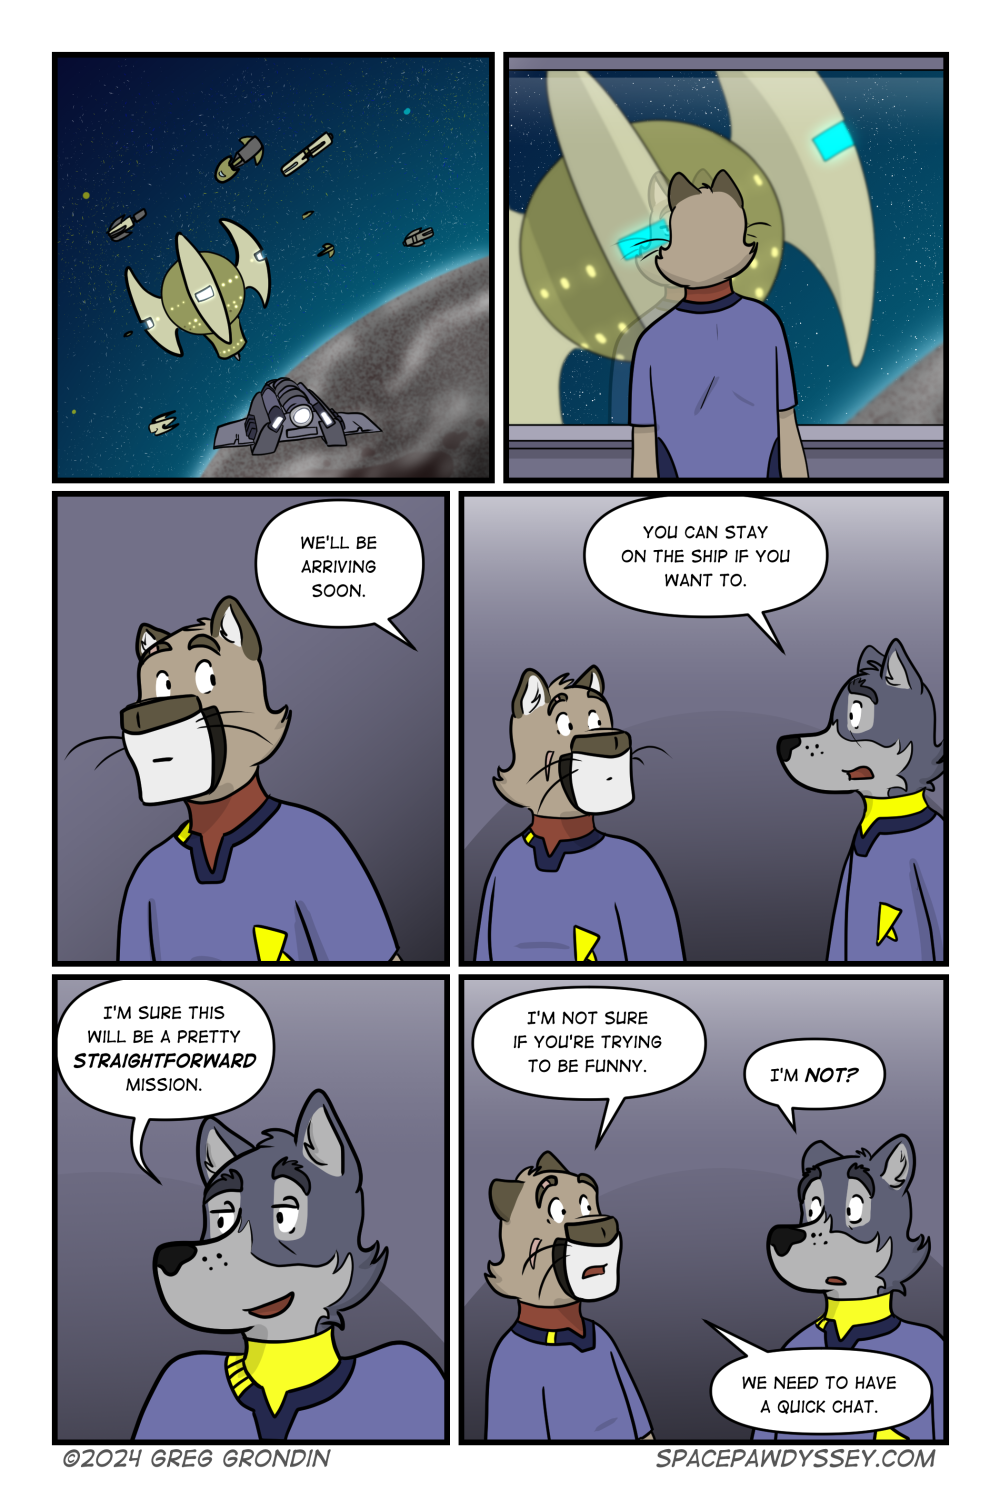 Space Pawdyssey #666